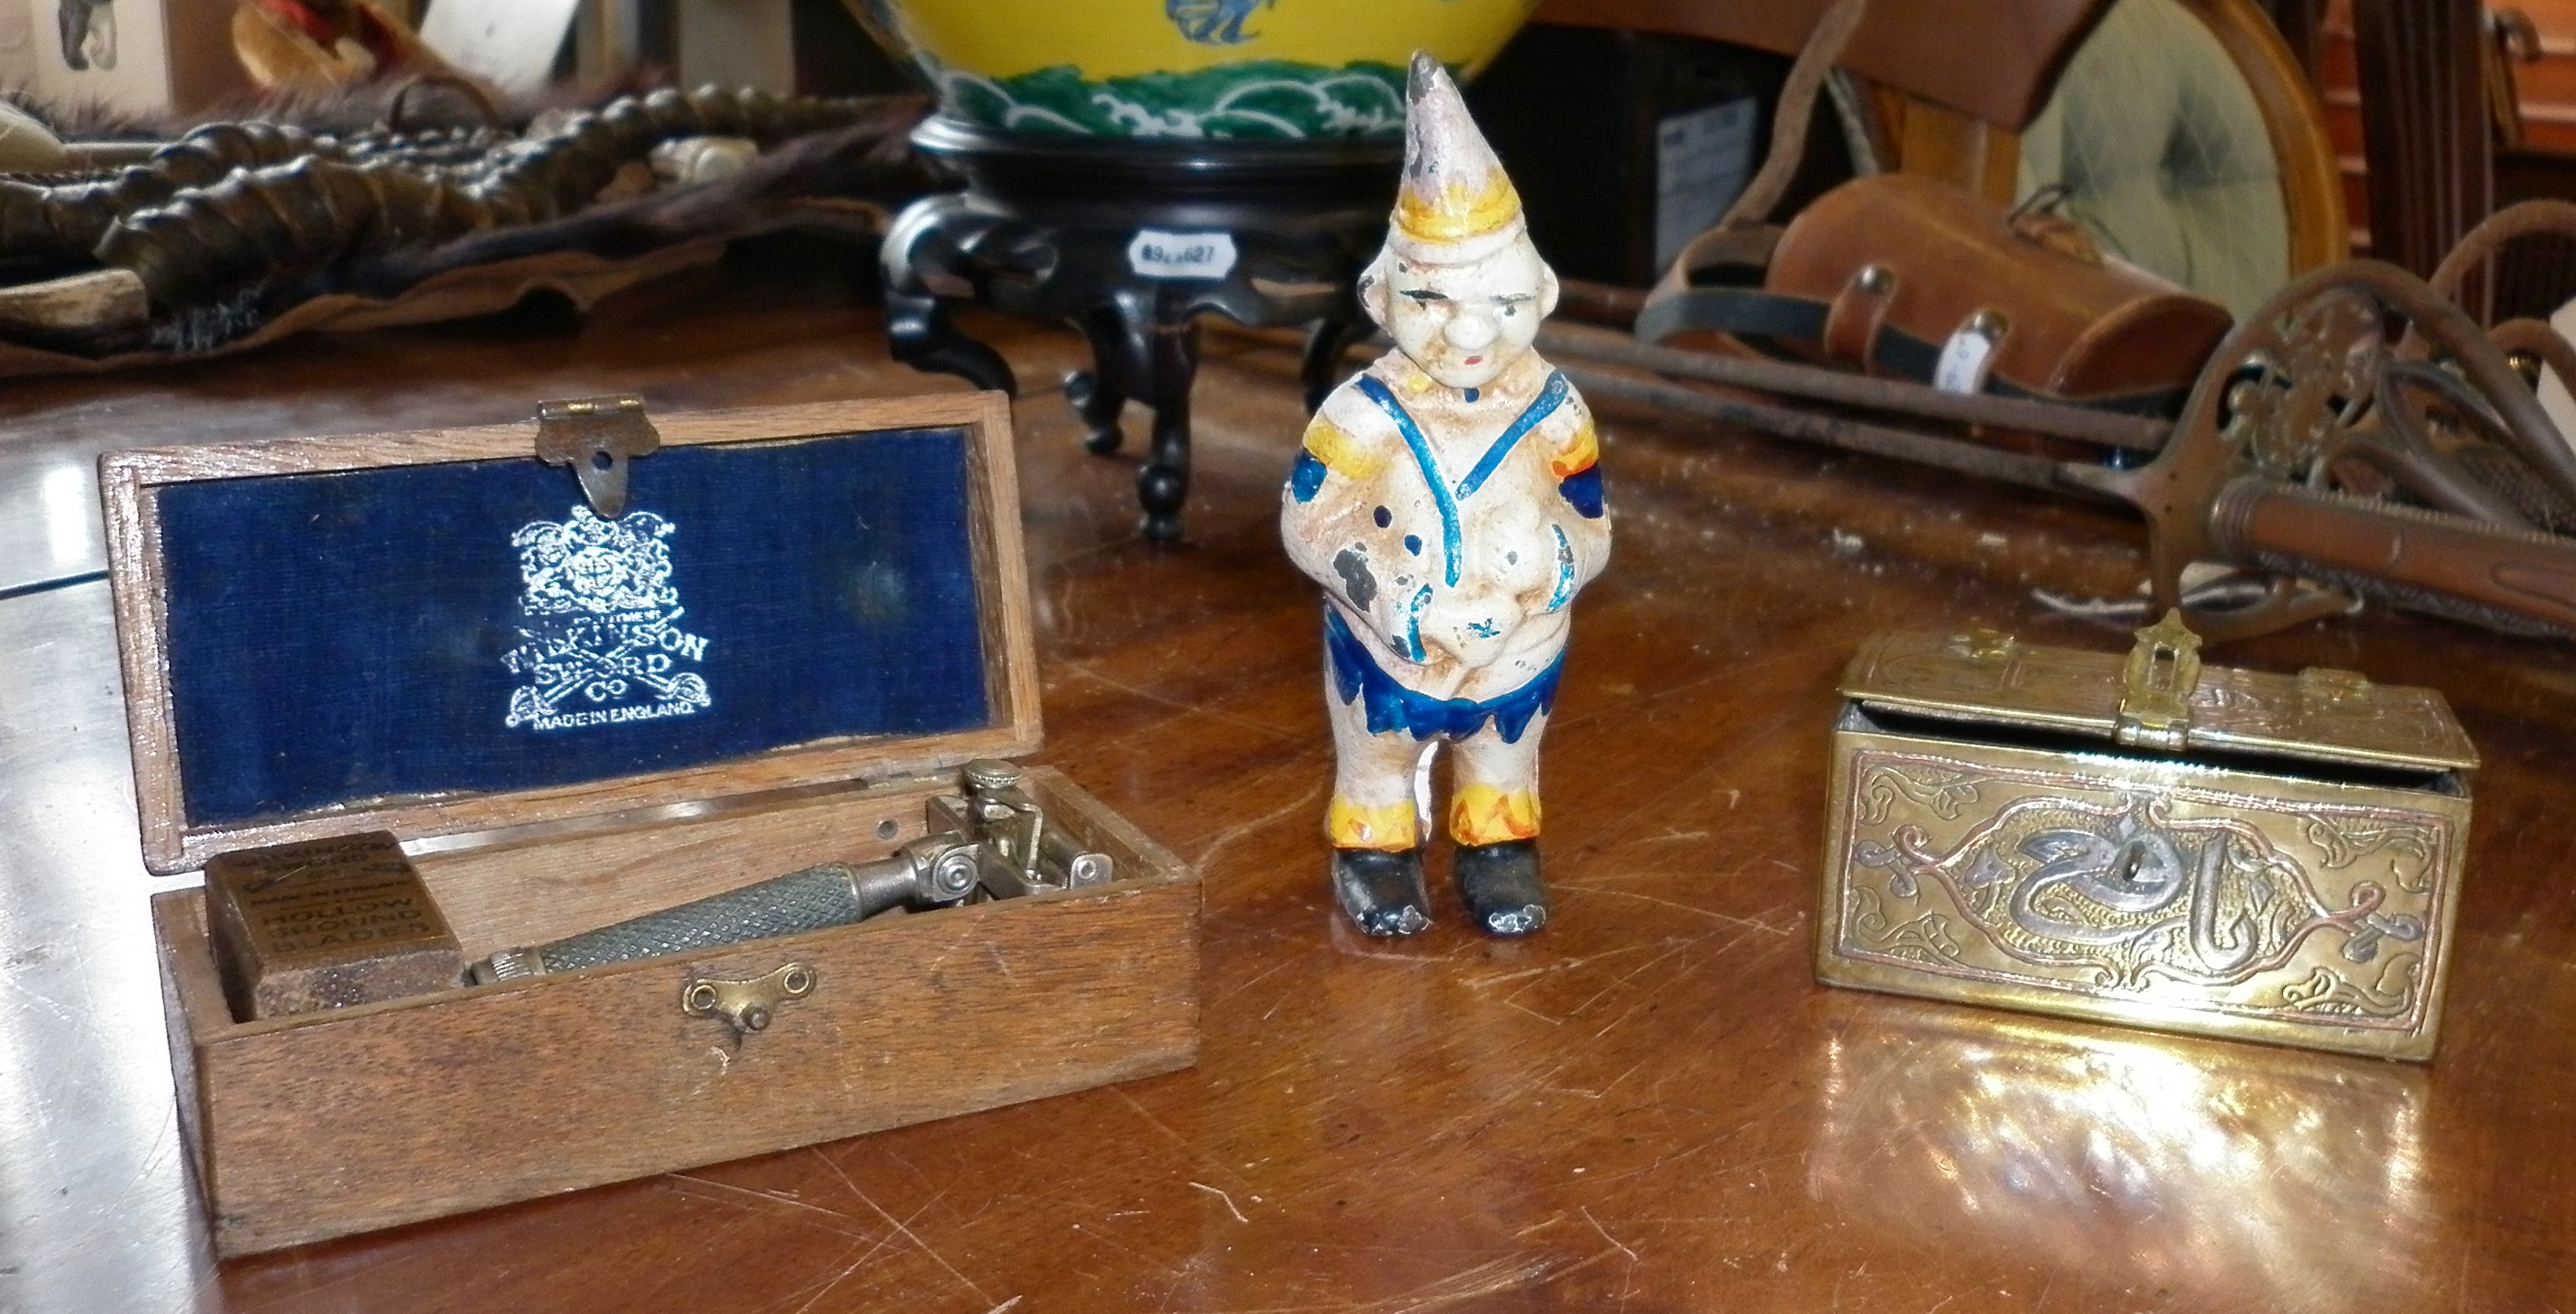 Painted cast iron clown money box, small Persian brass casket and a Wilkinson Sword safety razor,